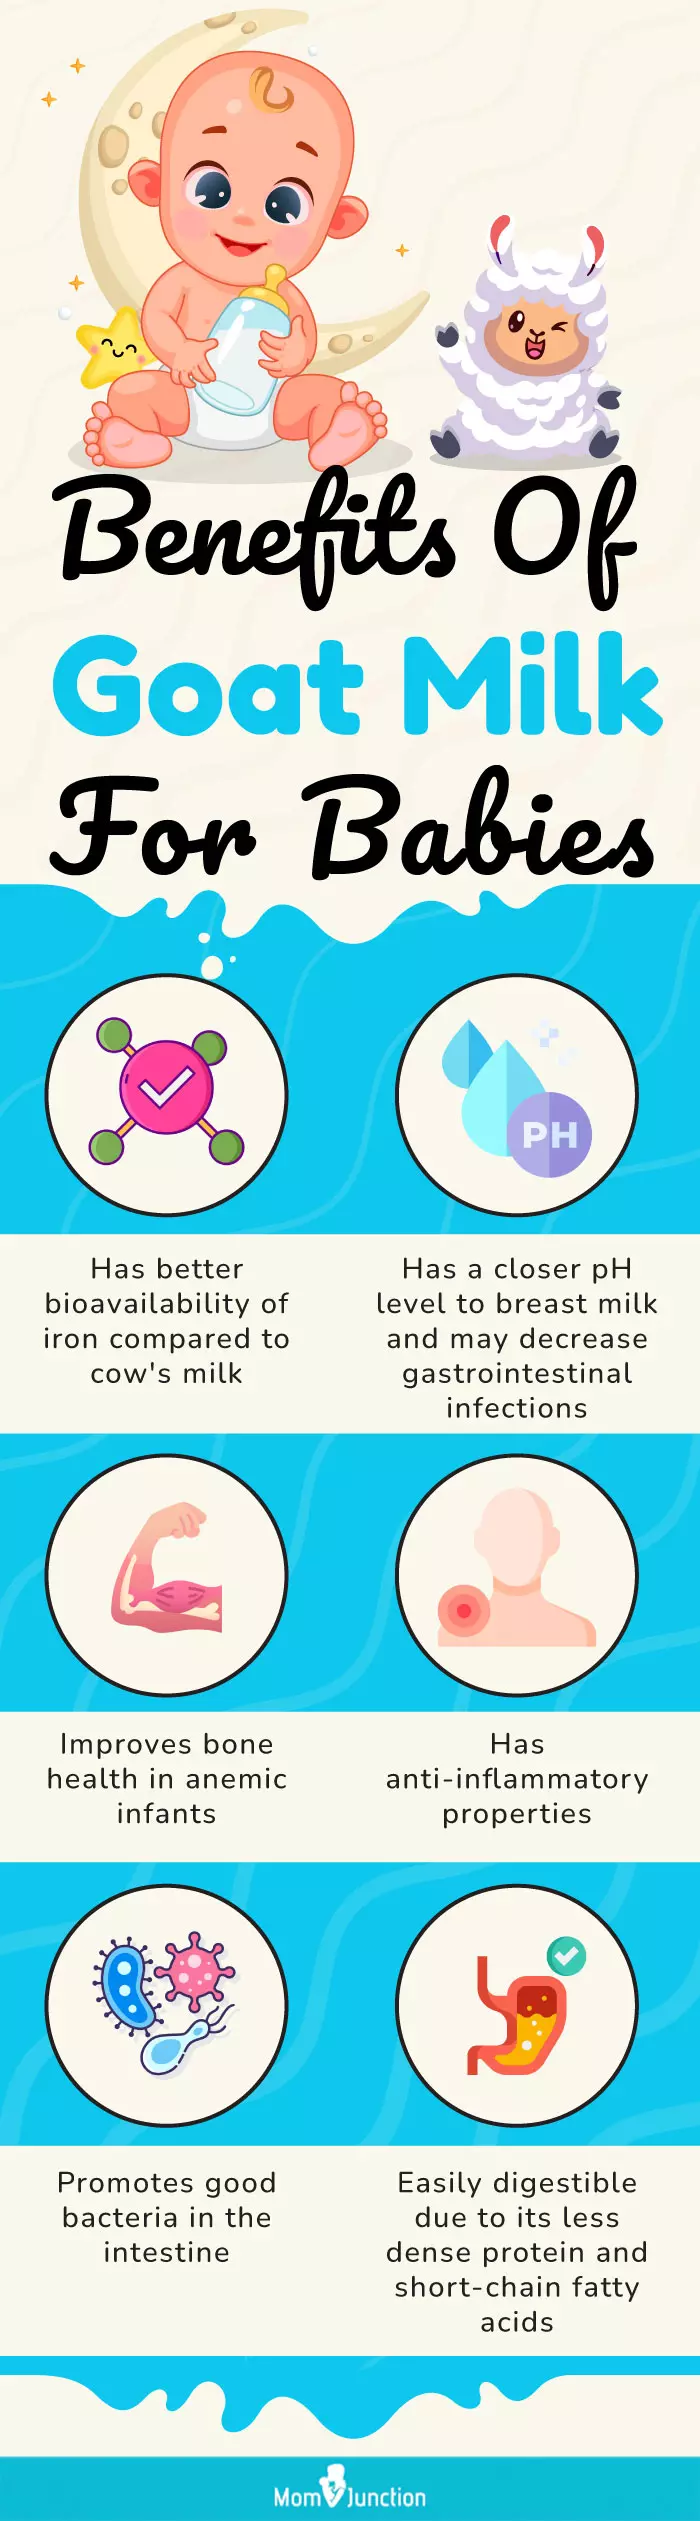 benefits of goat milk for babies (infographic)